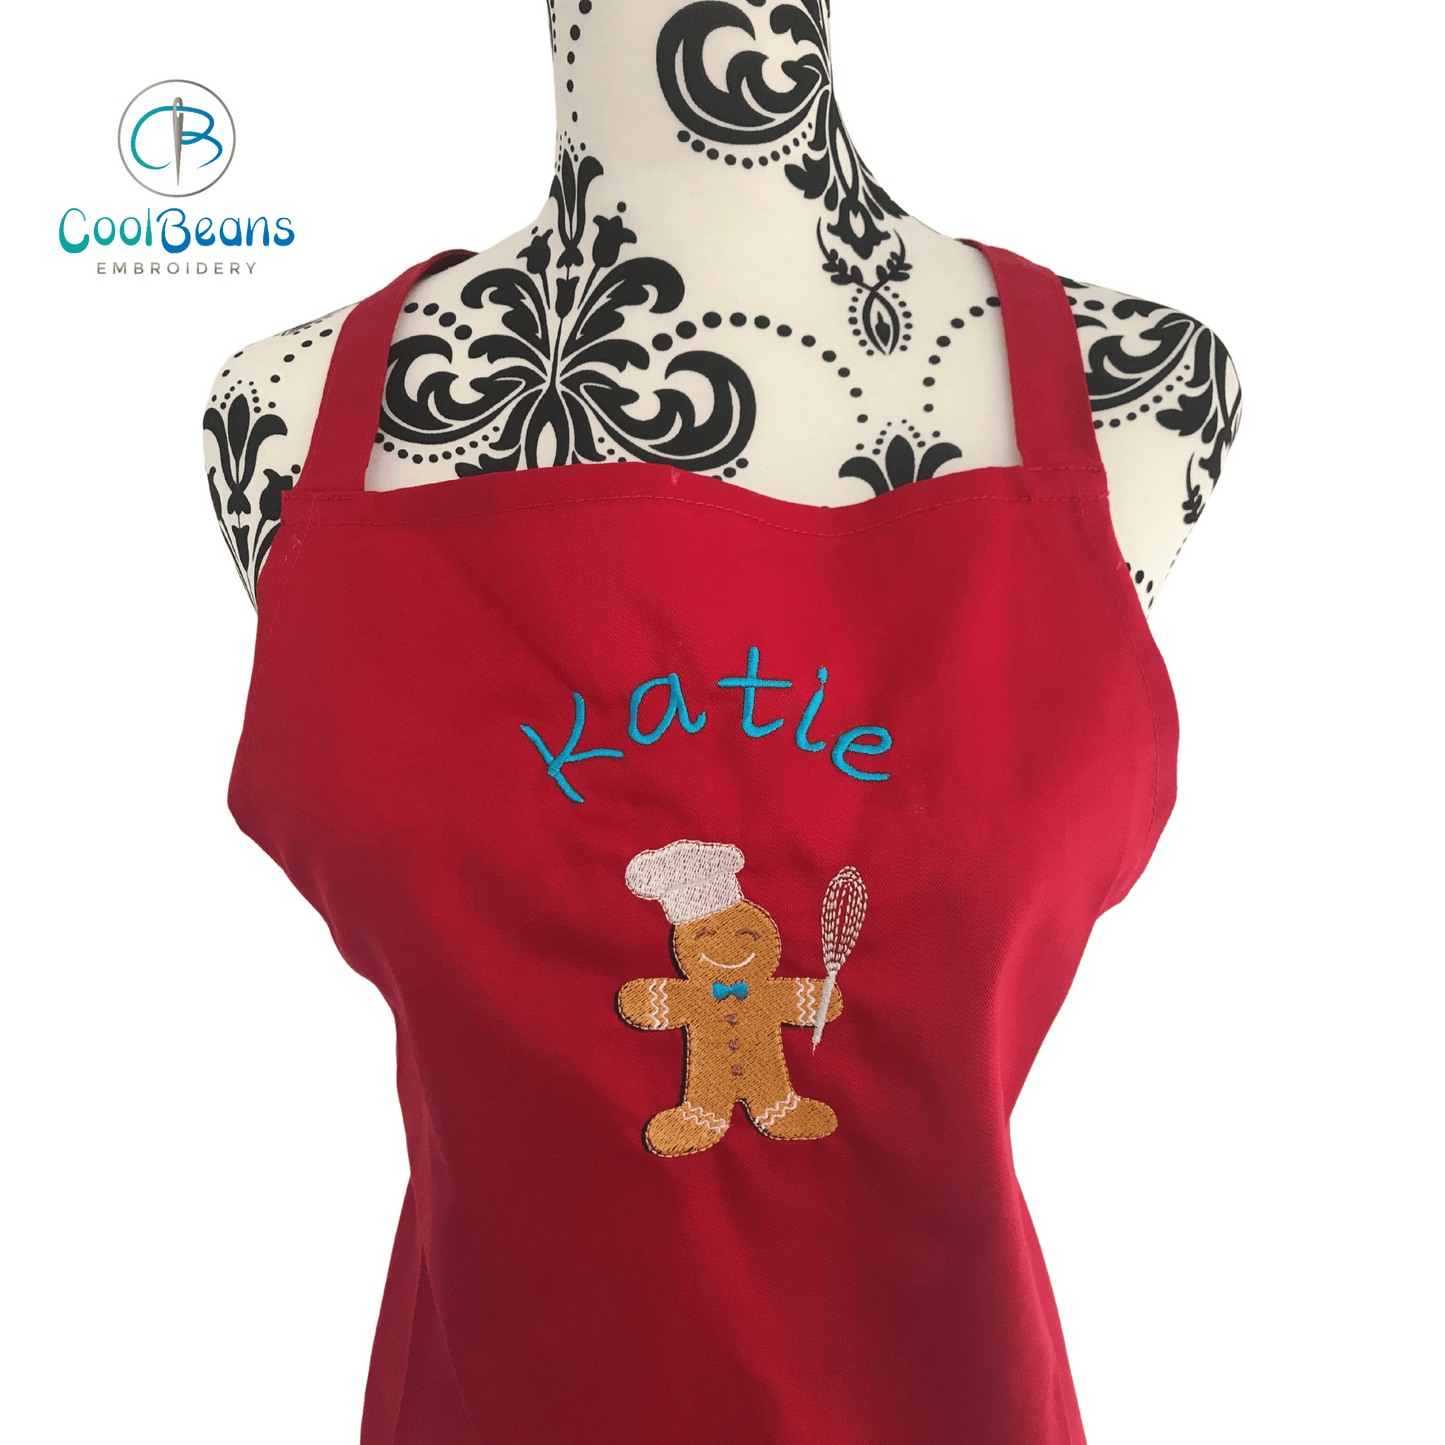 Apron - Gingerbread Man - Personalised - Cool Beans Embroidery & Personalisation